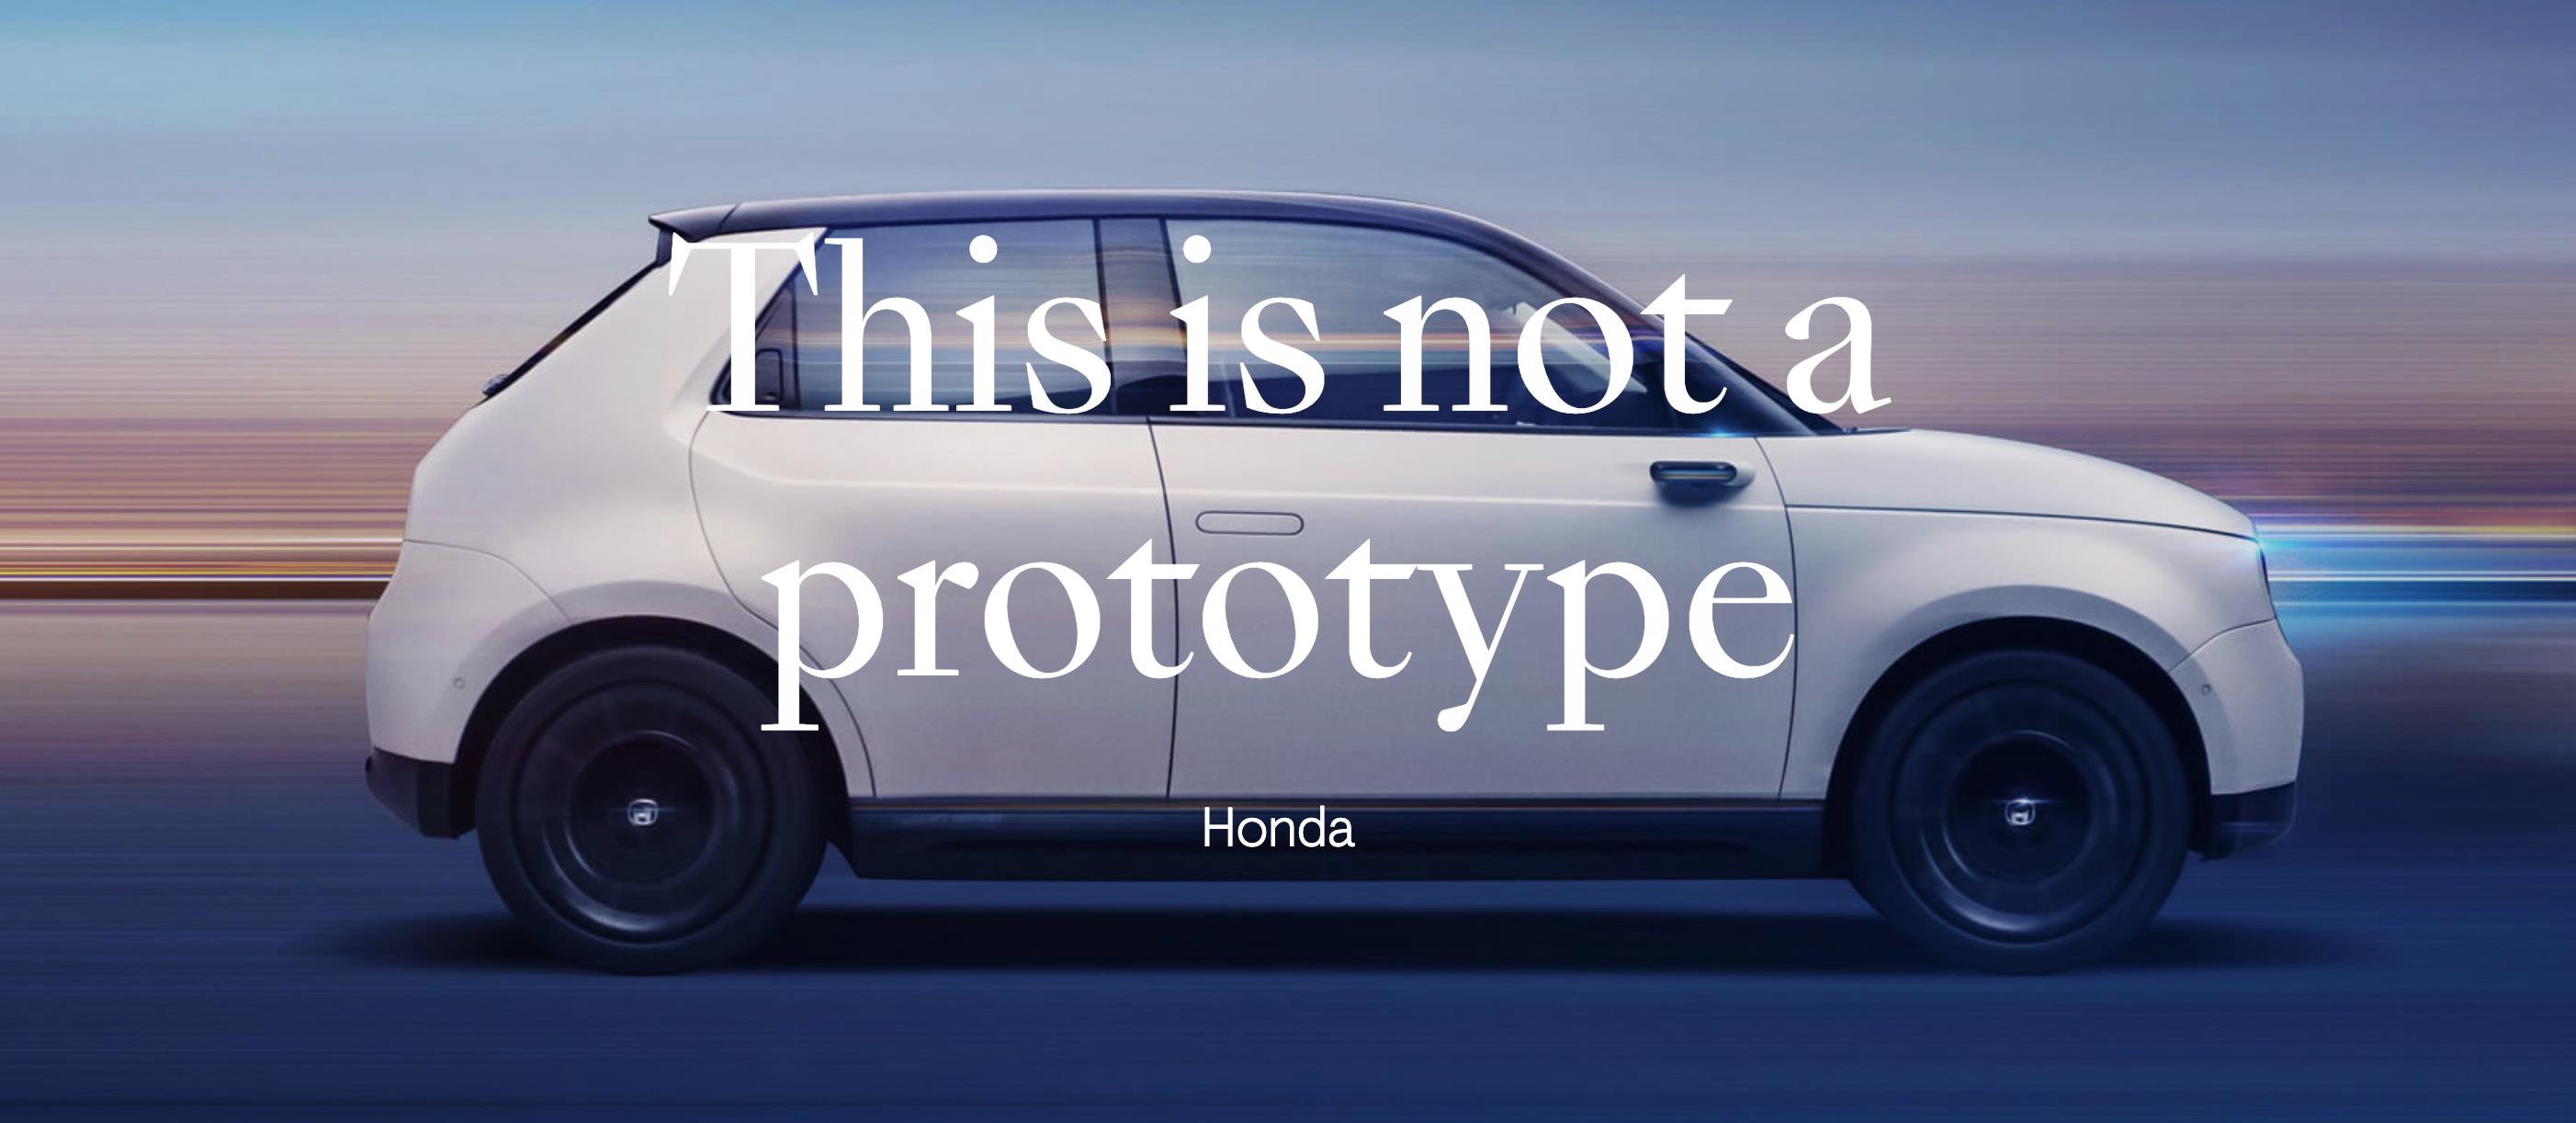 Honda e - "This is Not a Prototype" Campaign